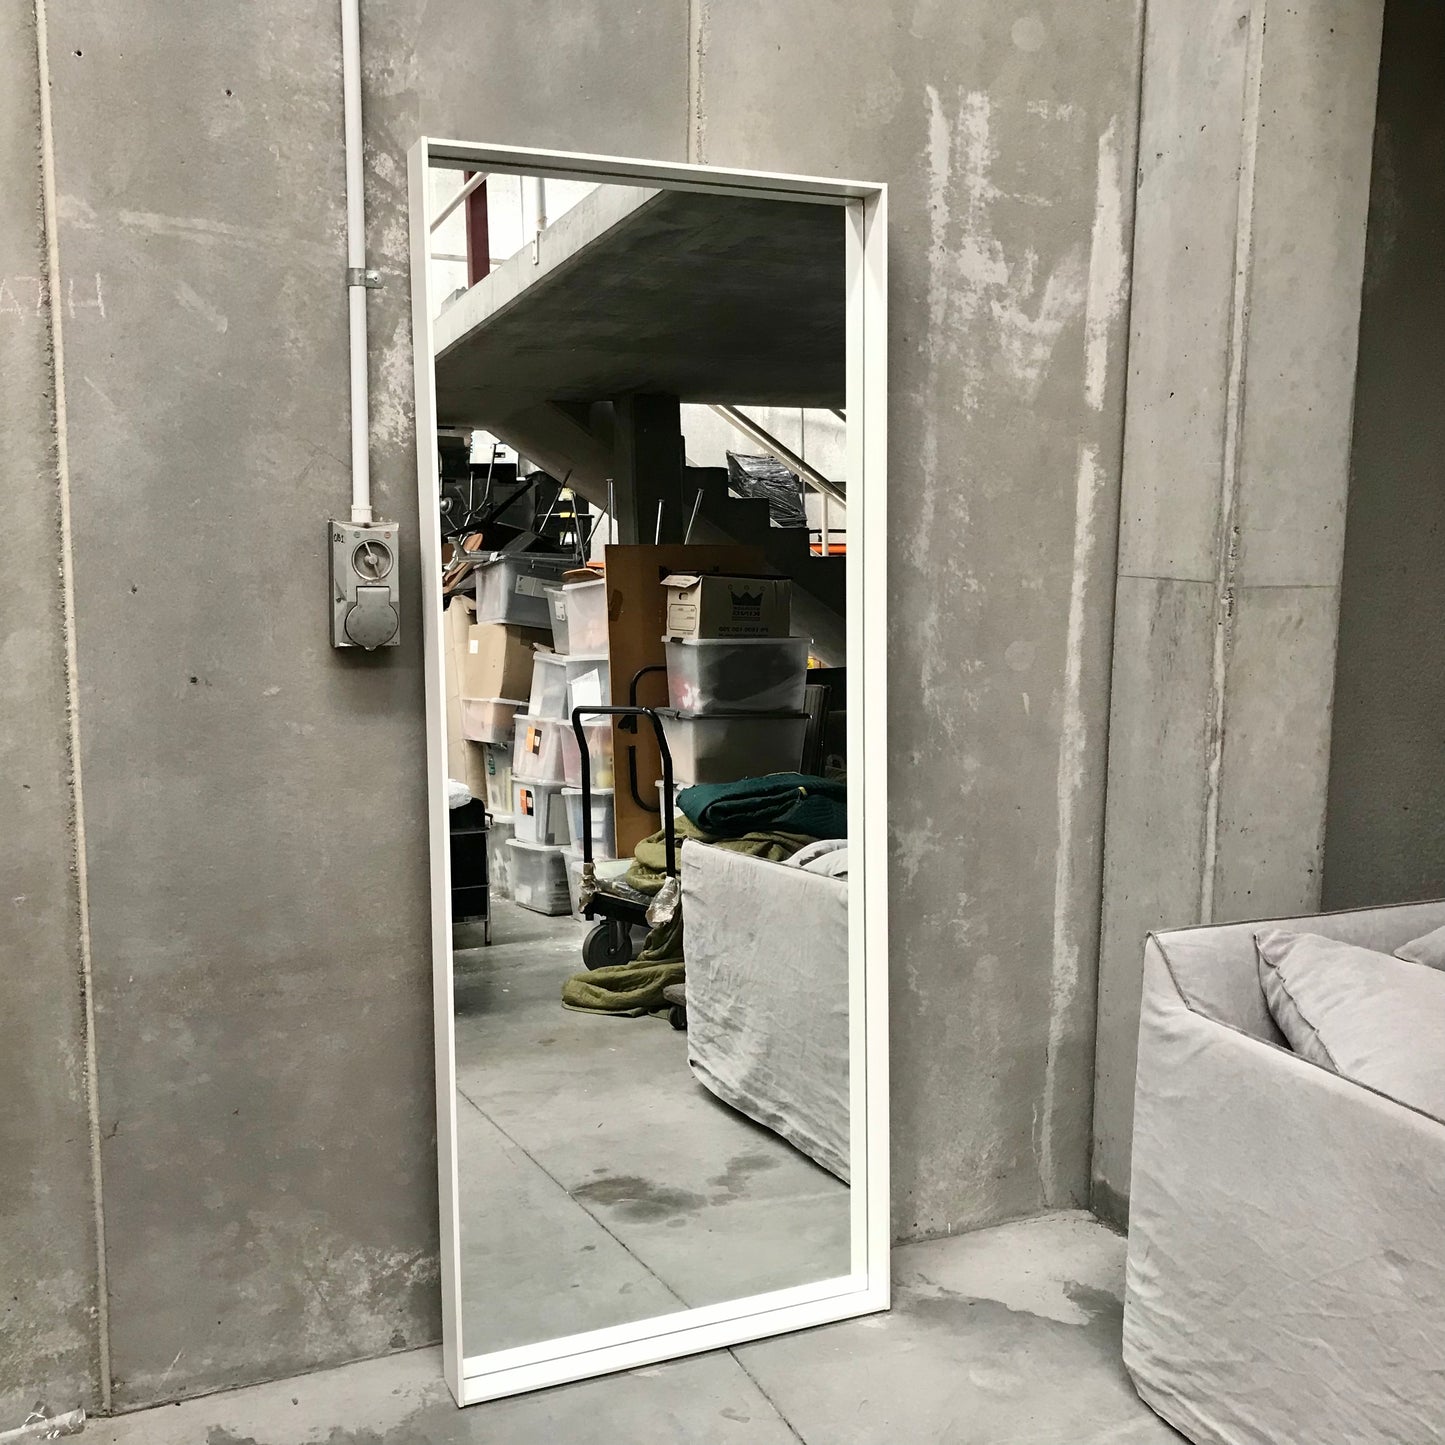 Load image into Gallery viewer, Sara Floor Mirror by Flaviano Capriotti for Poliform
